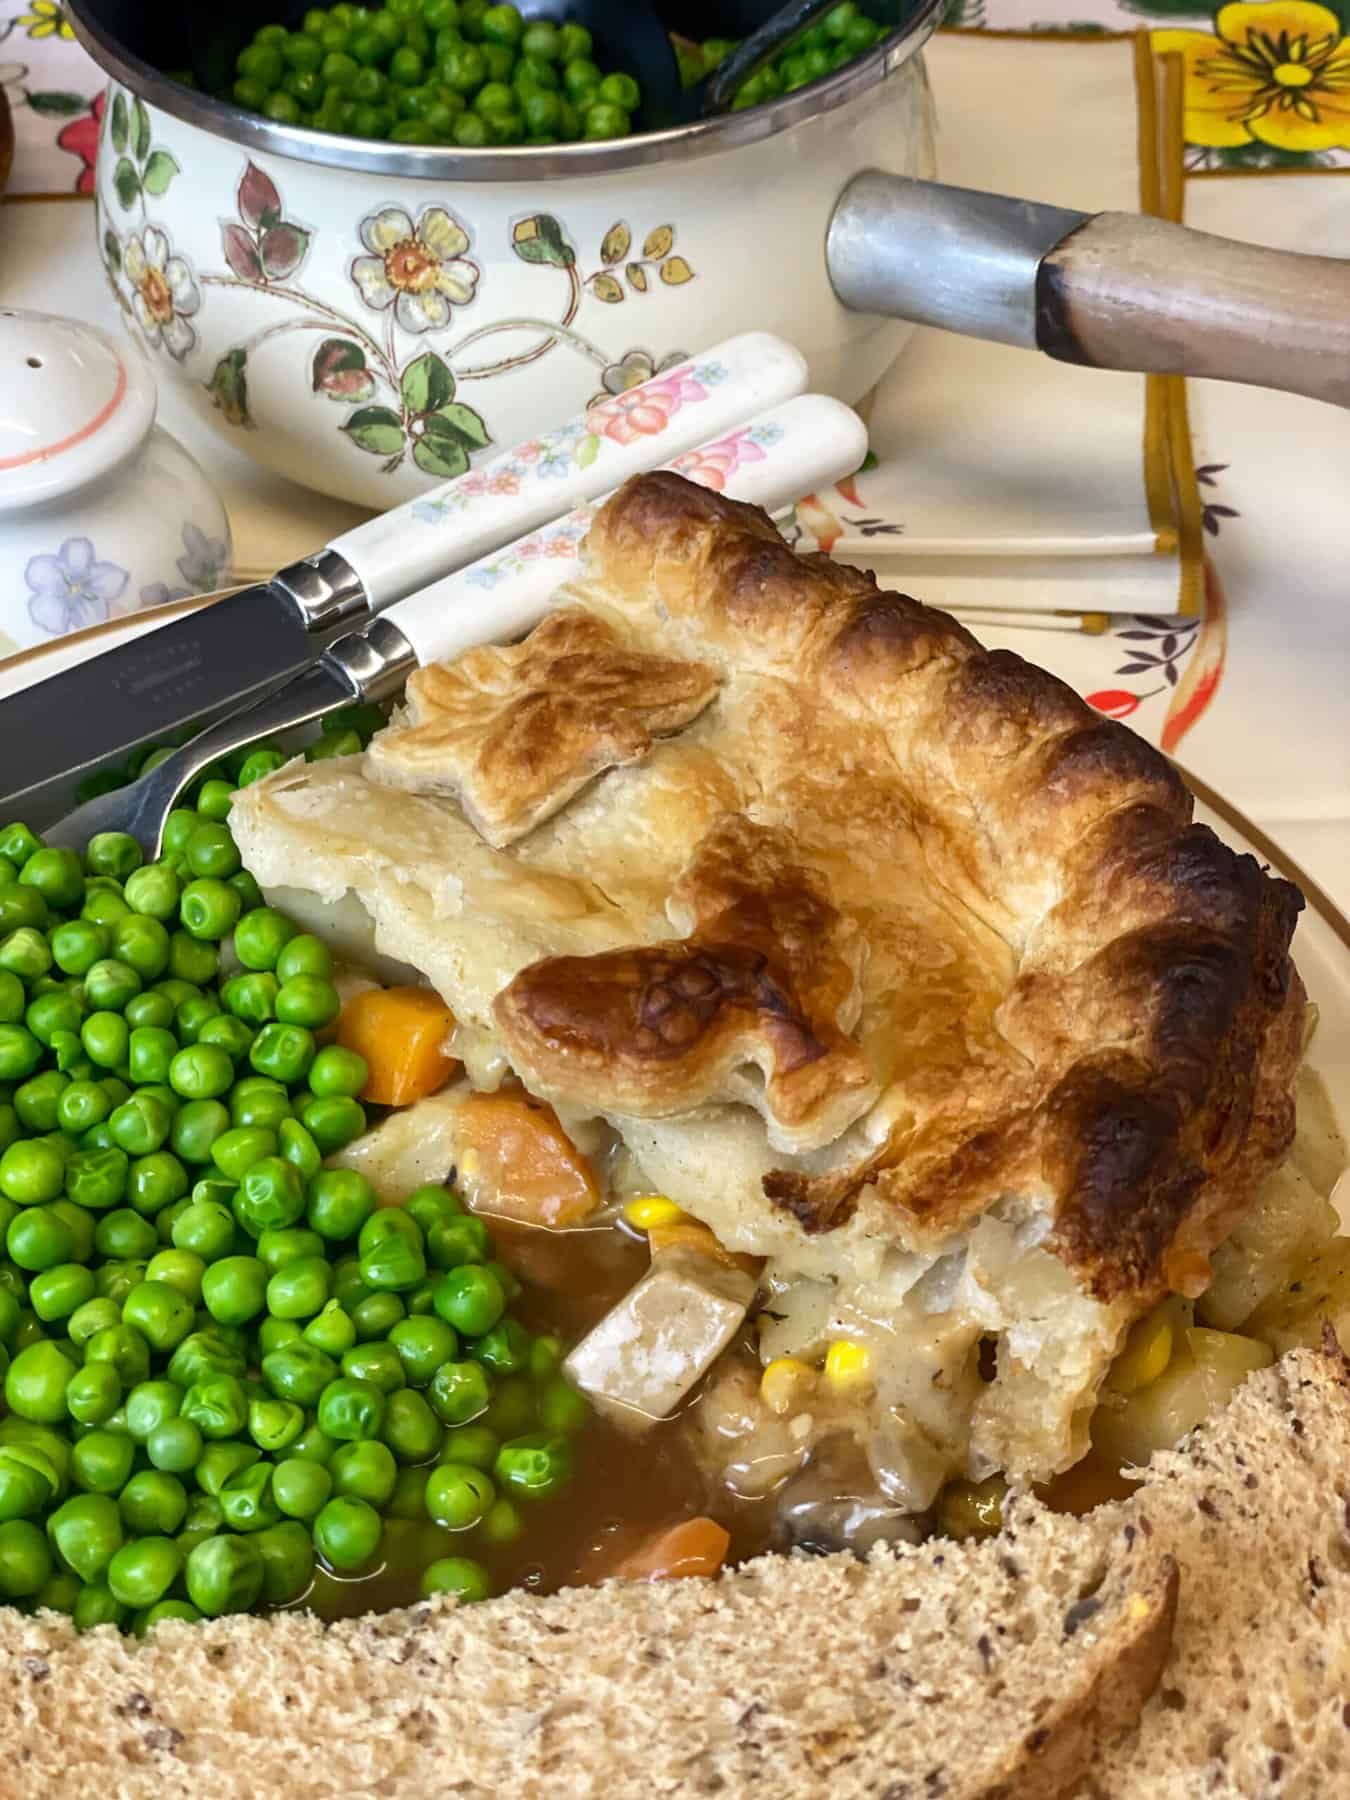 Slice of vegan pie with peas, bread, gravy on dinner plate, flower patterned pot of peas in background, with flower handled fork and knife.